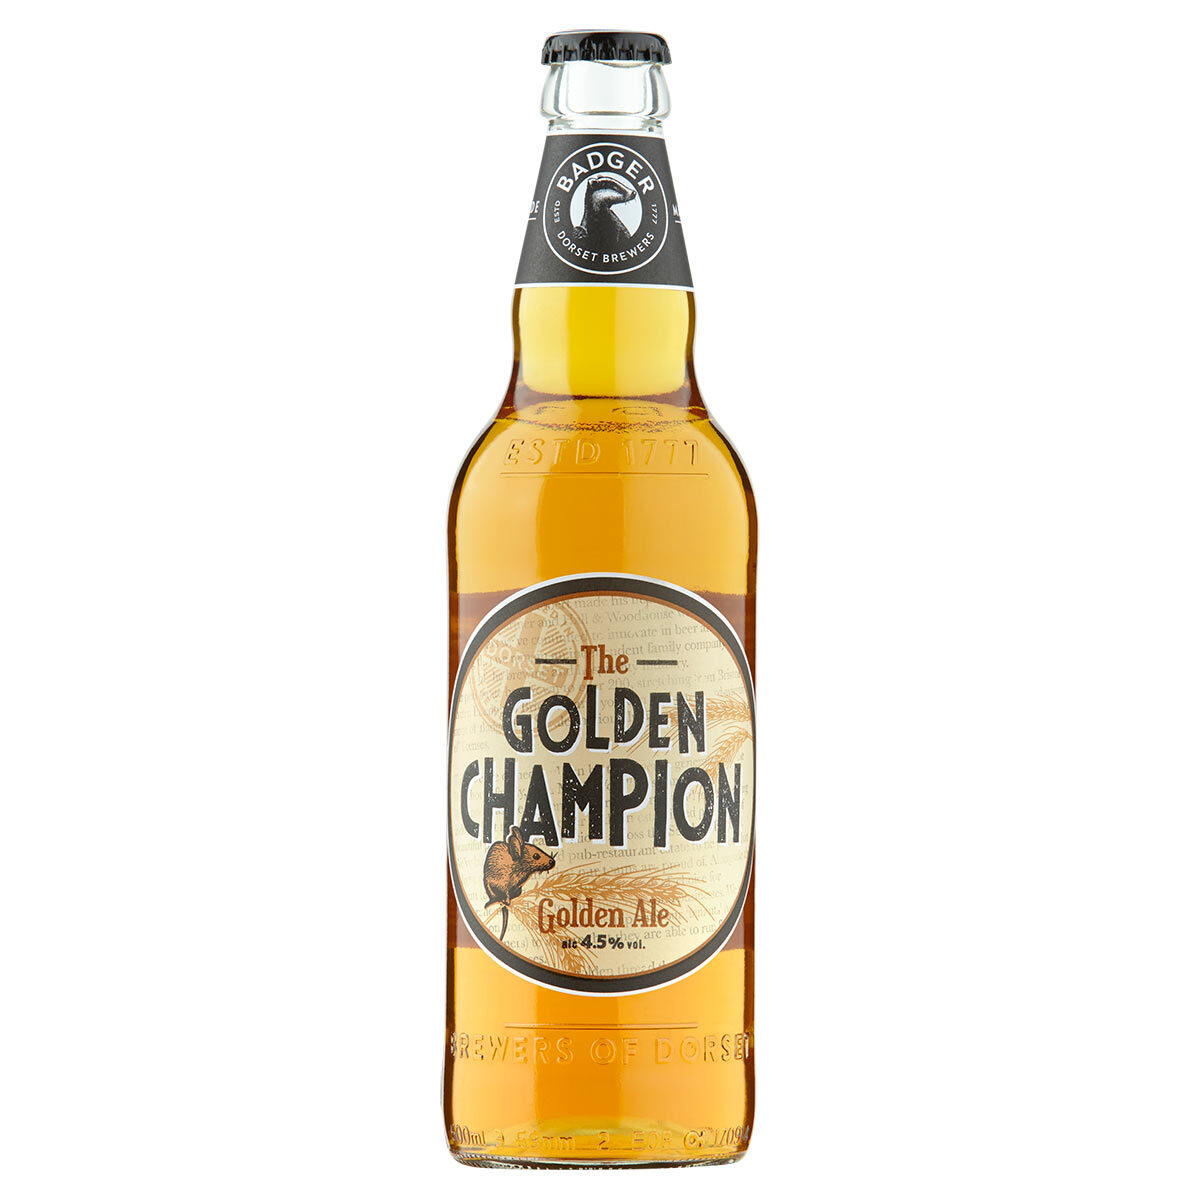 Cut out image of Golden Champion Bottle on white background